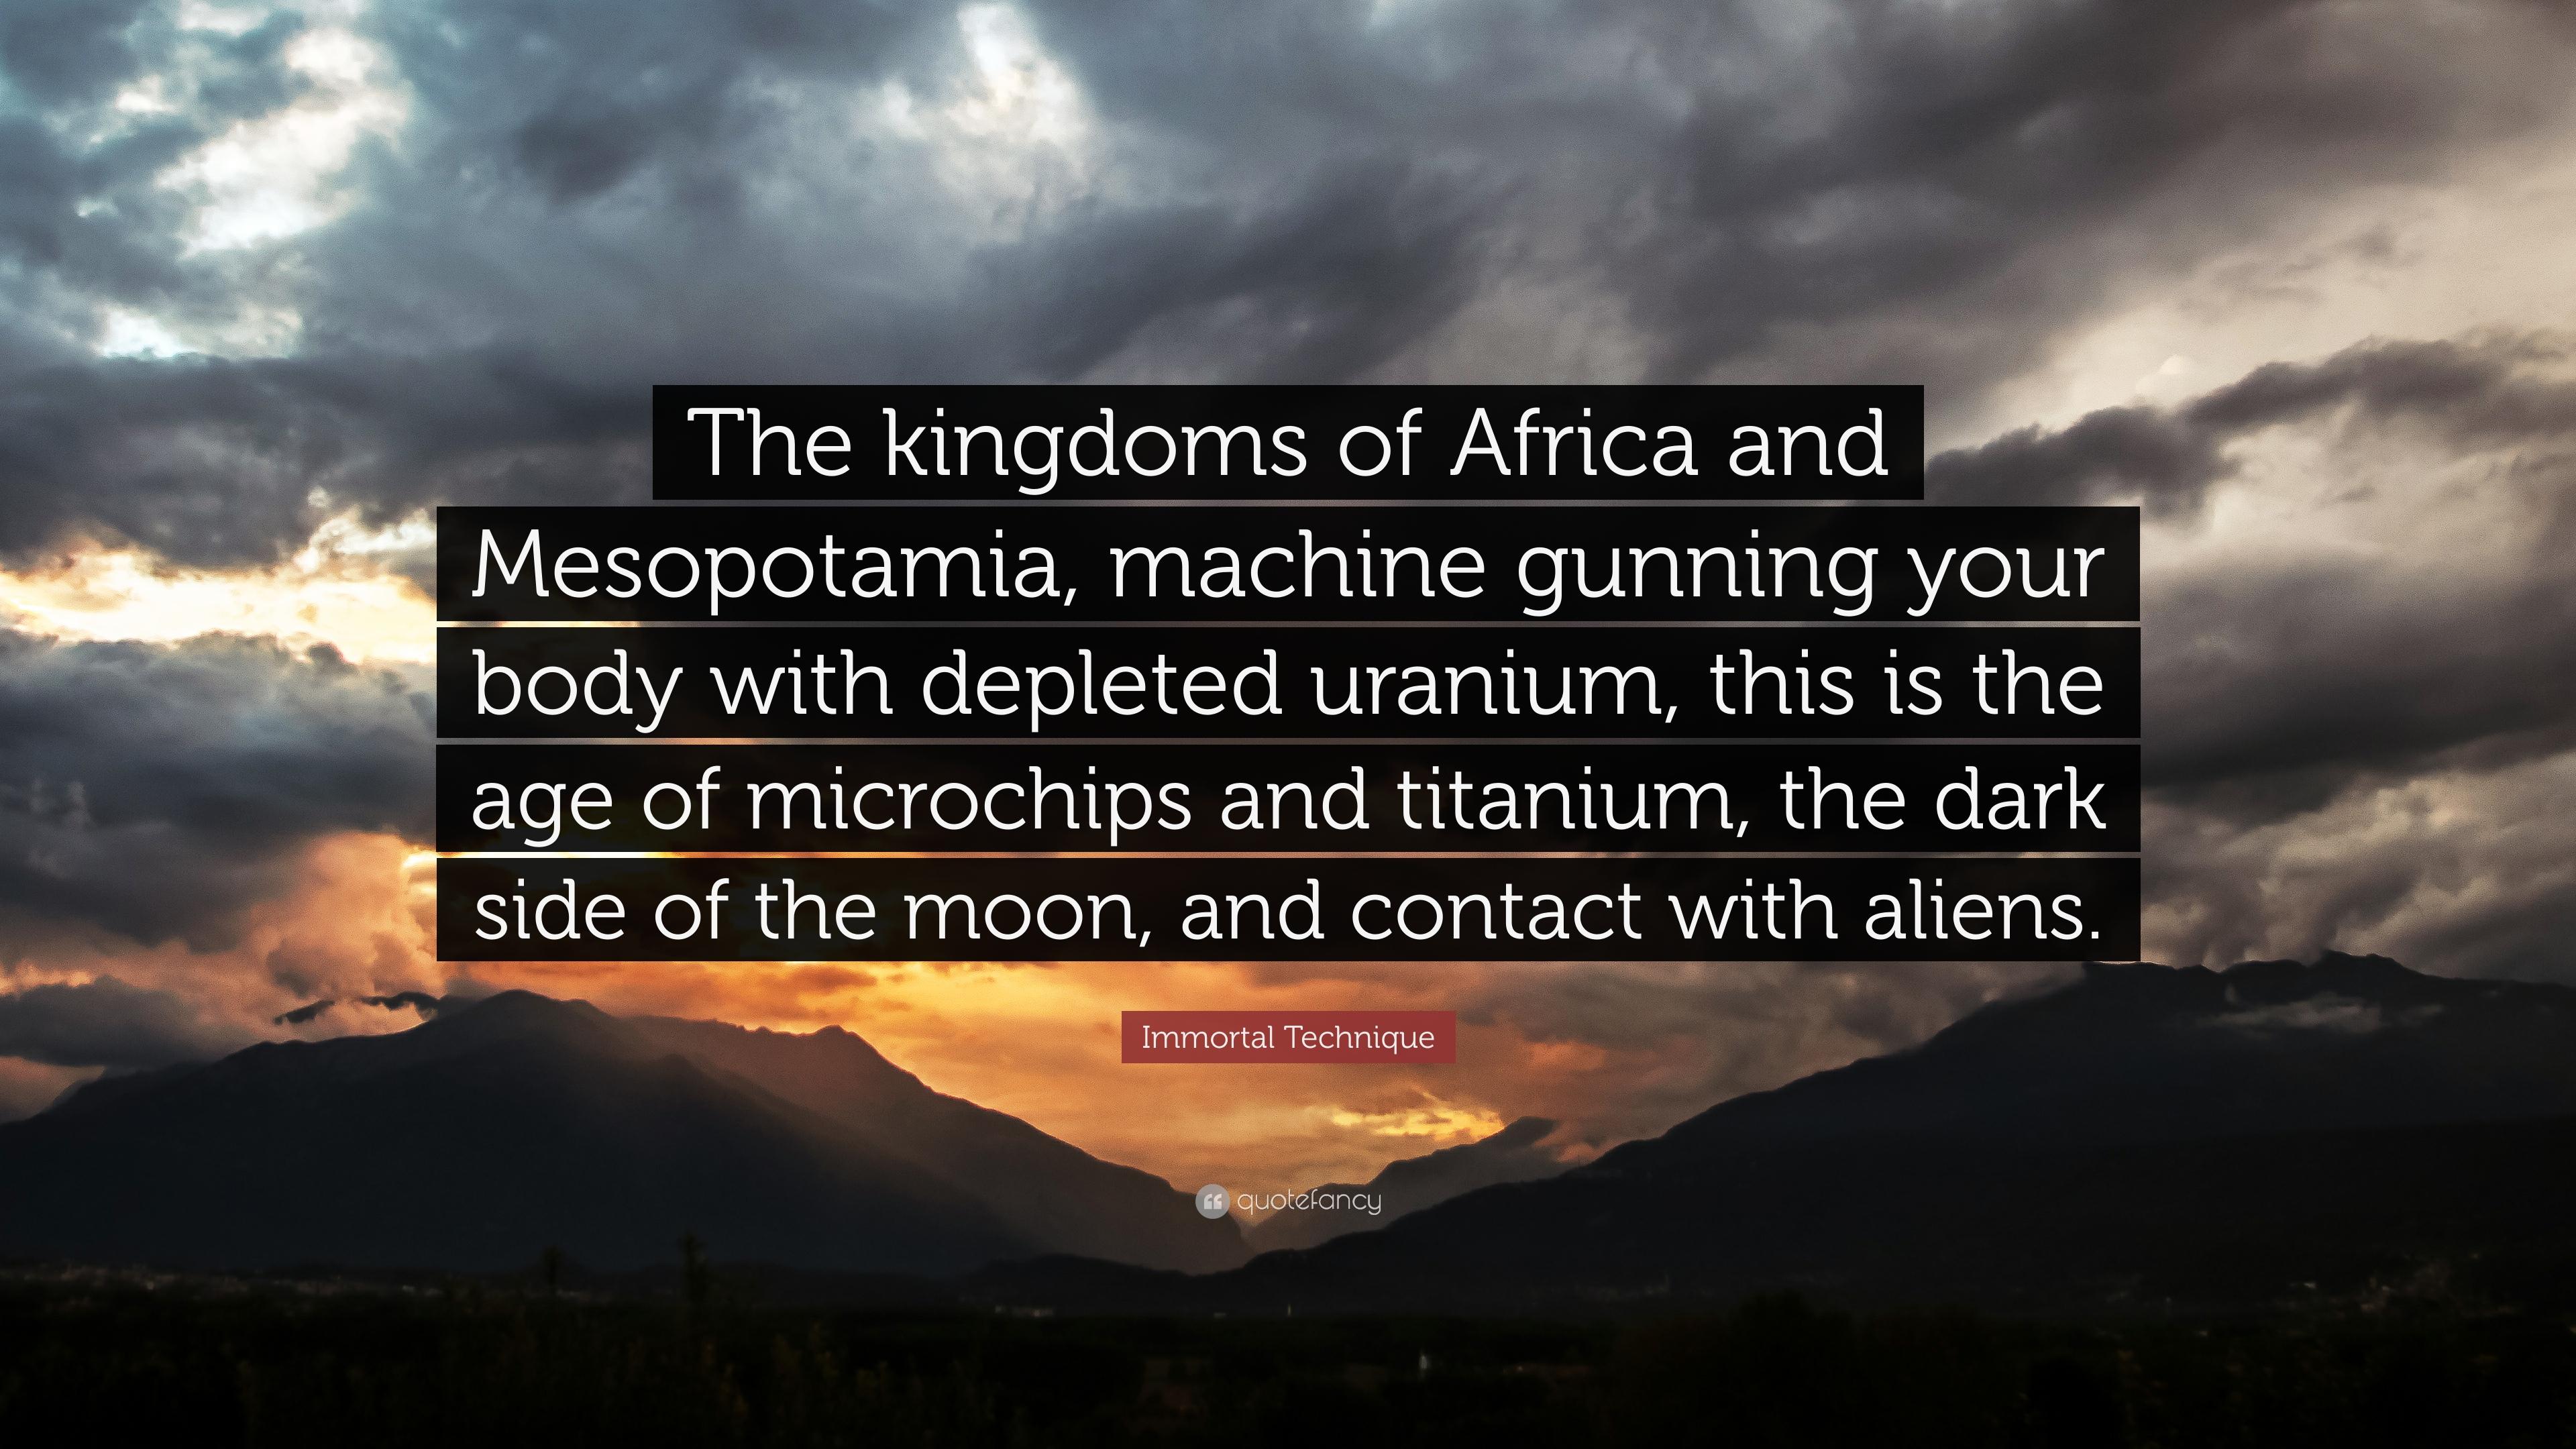 Immortal Technique Quote: “The kingdoms of Africa and Mesopotamia